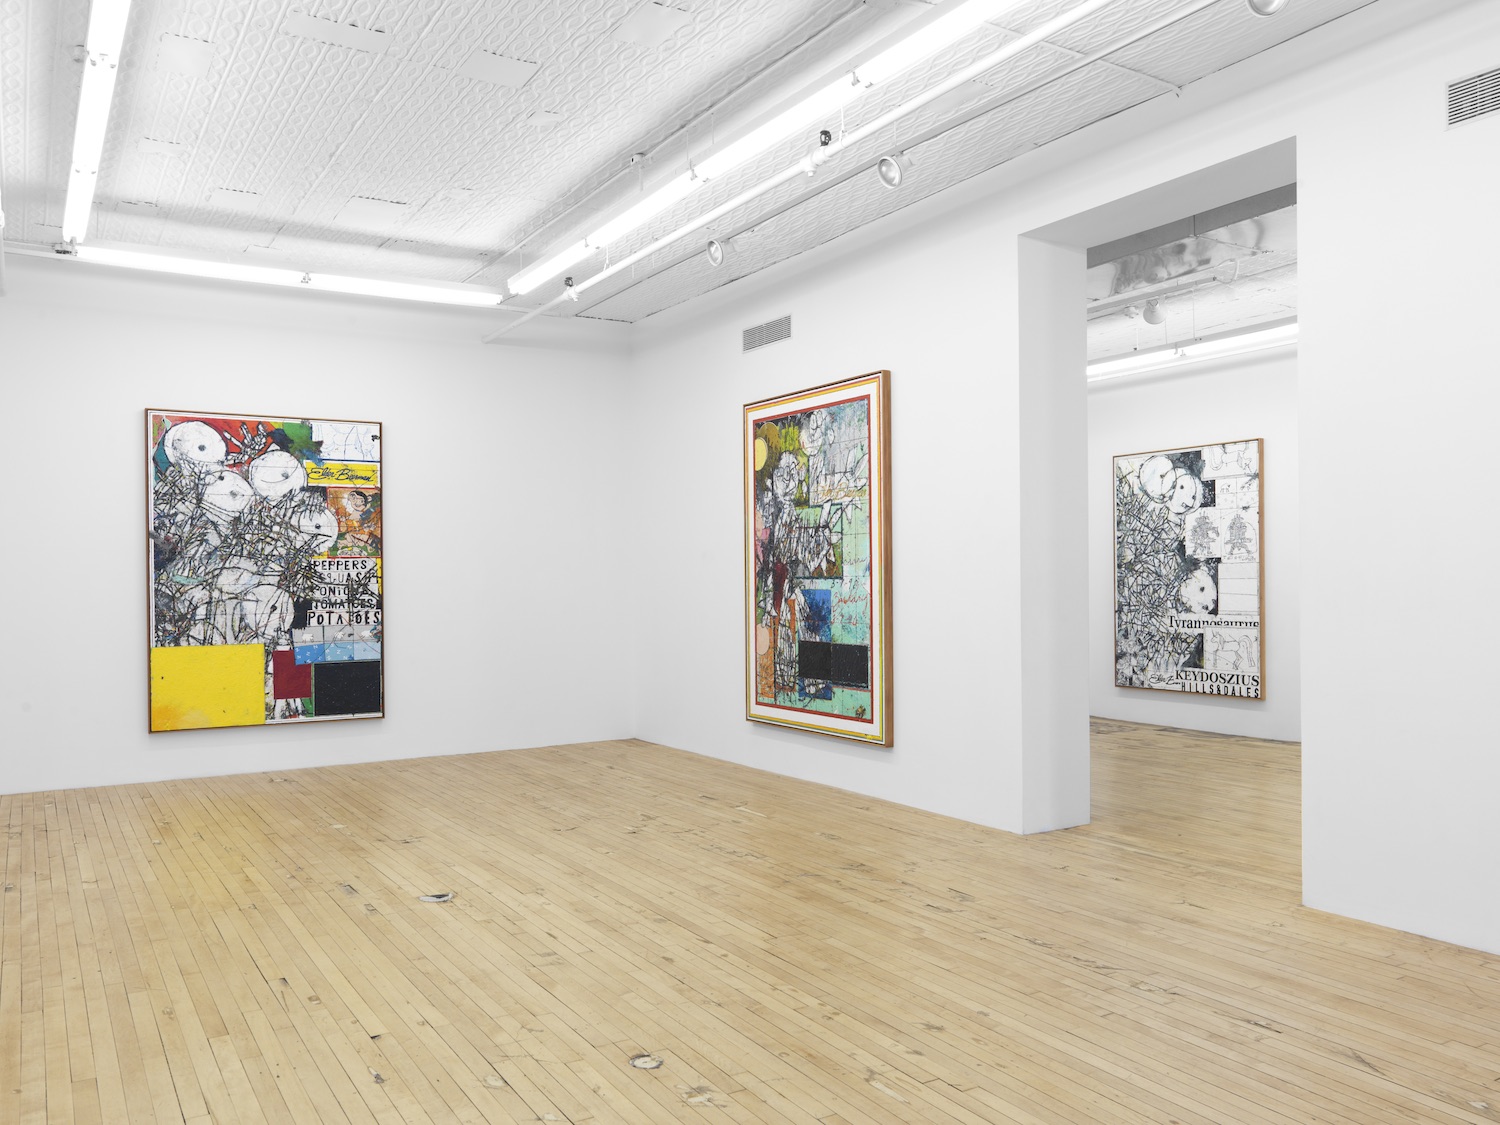 Installation view, Hills & Dales, Zachary Armstrong at Feuer/Mesler, New York, 2016. Courtesy of Feuer/Mesler.